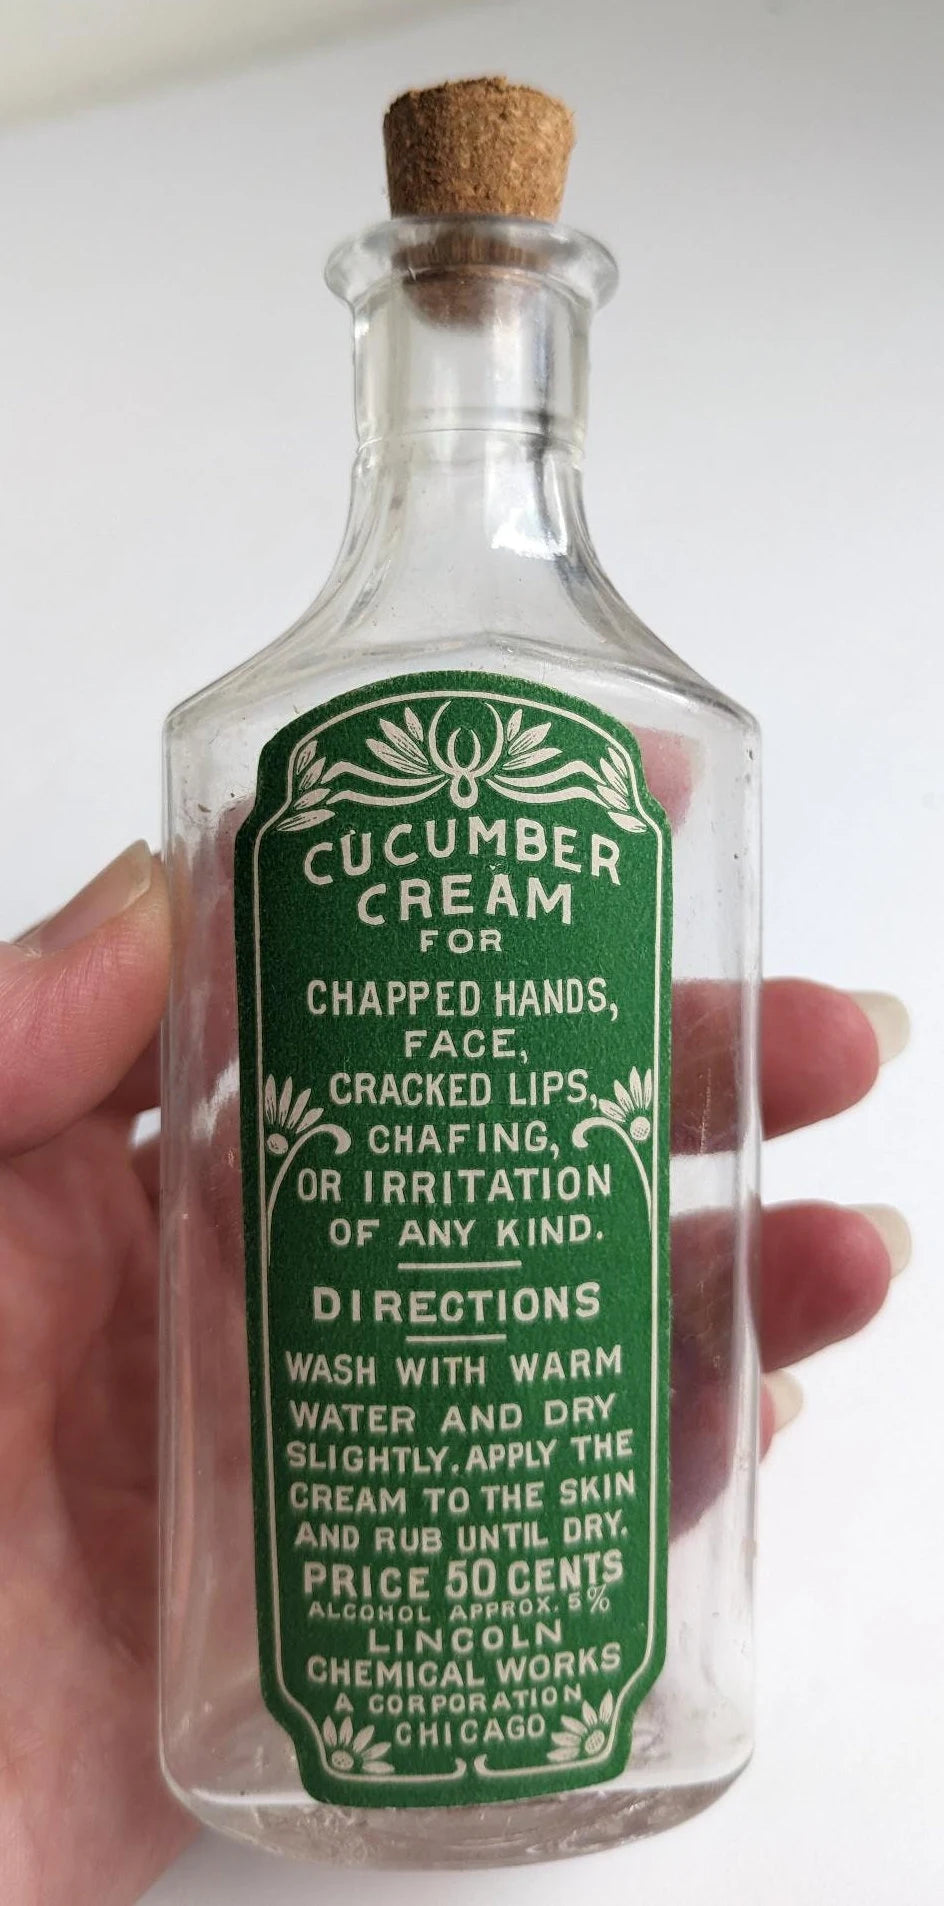 Vintage Antique Style Bottles - Antiseptic Spray and Gargle, Lotion for Eczema, Cucumber Cream and Hair Pomade Labels